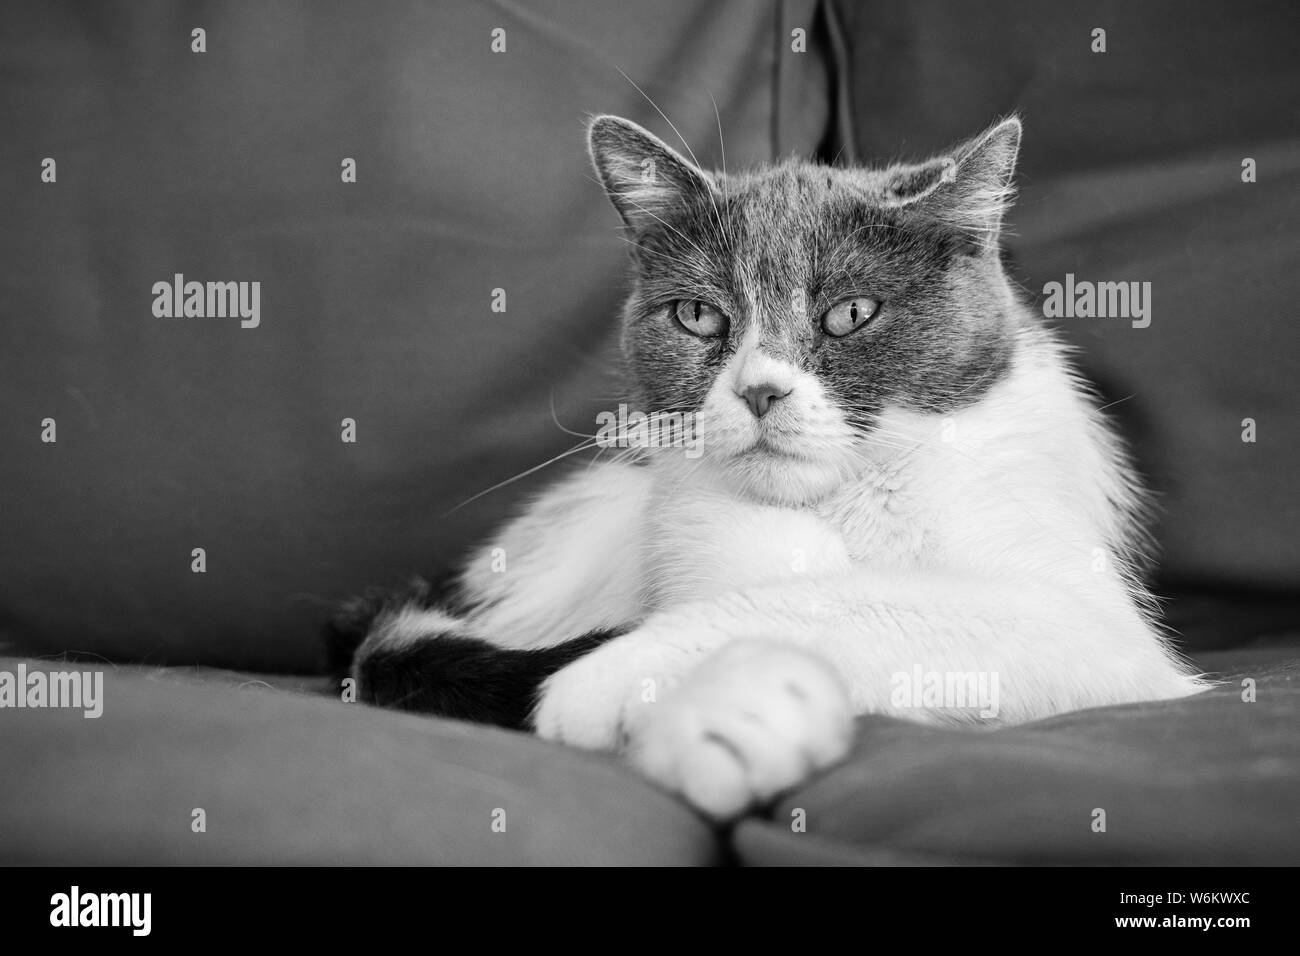 Black and white photo of mixed-breed cat sitting on a couch with one paw over the other in a relaxed position Stock Photo